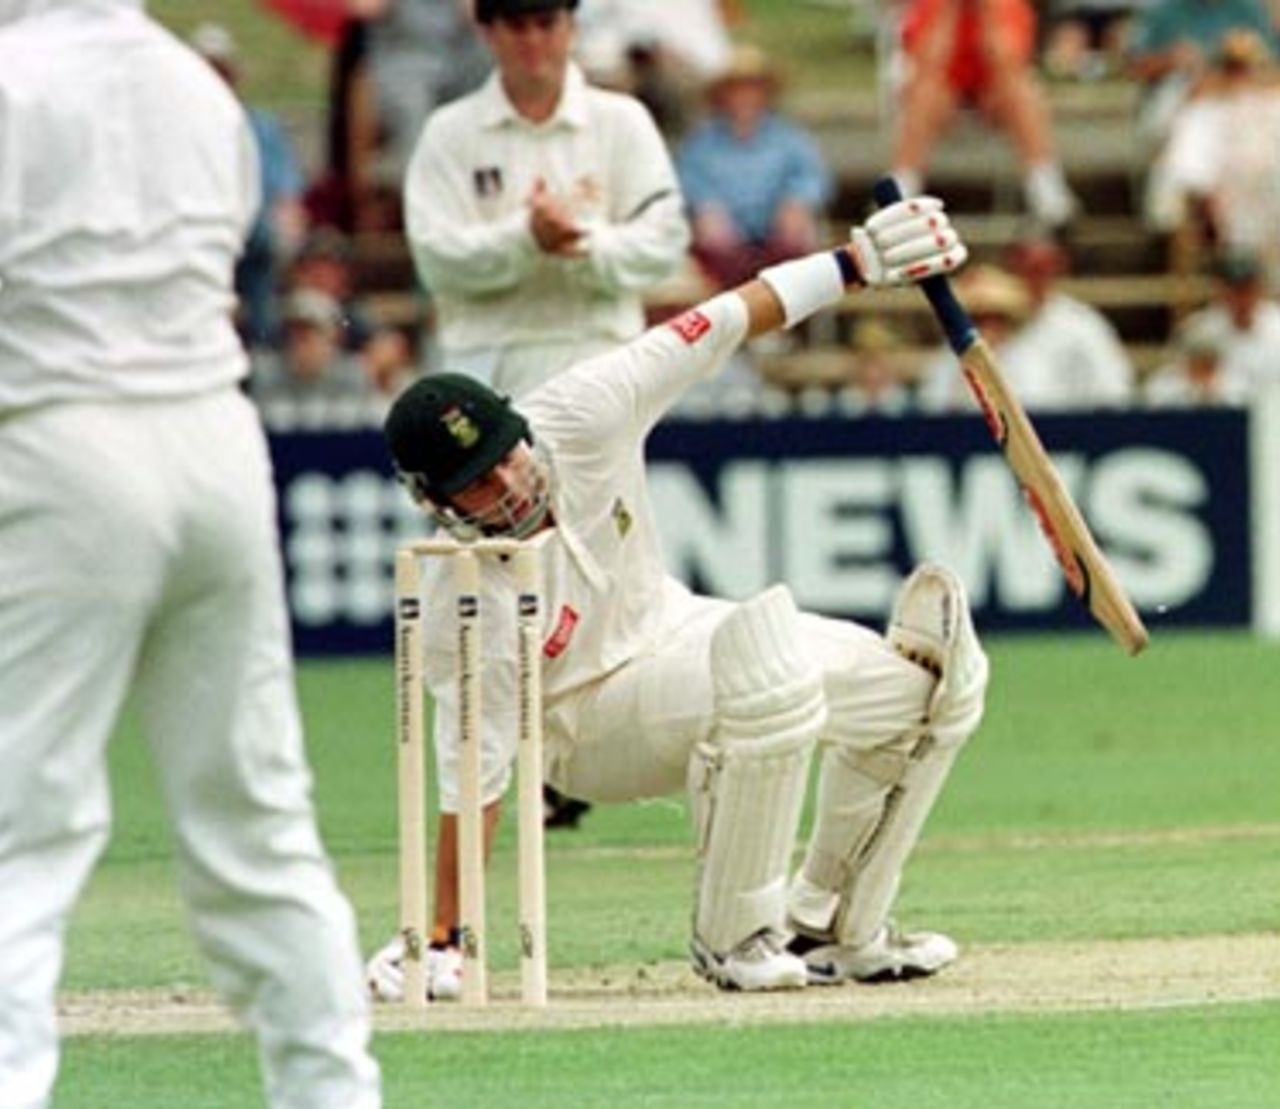 Adam Bacher on the ground as he avoids a bouncer ..Australia v South Africa 3rd Test, Day 1 at the Adelaide Oval, Friday January 30th 1998.